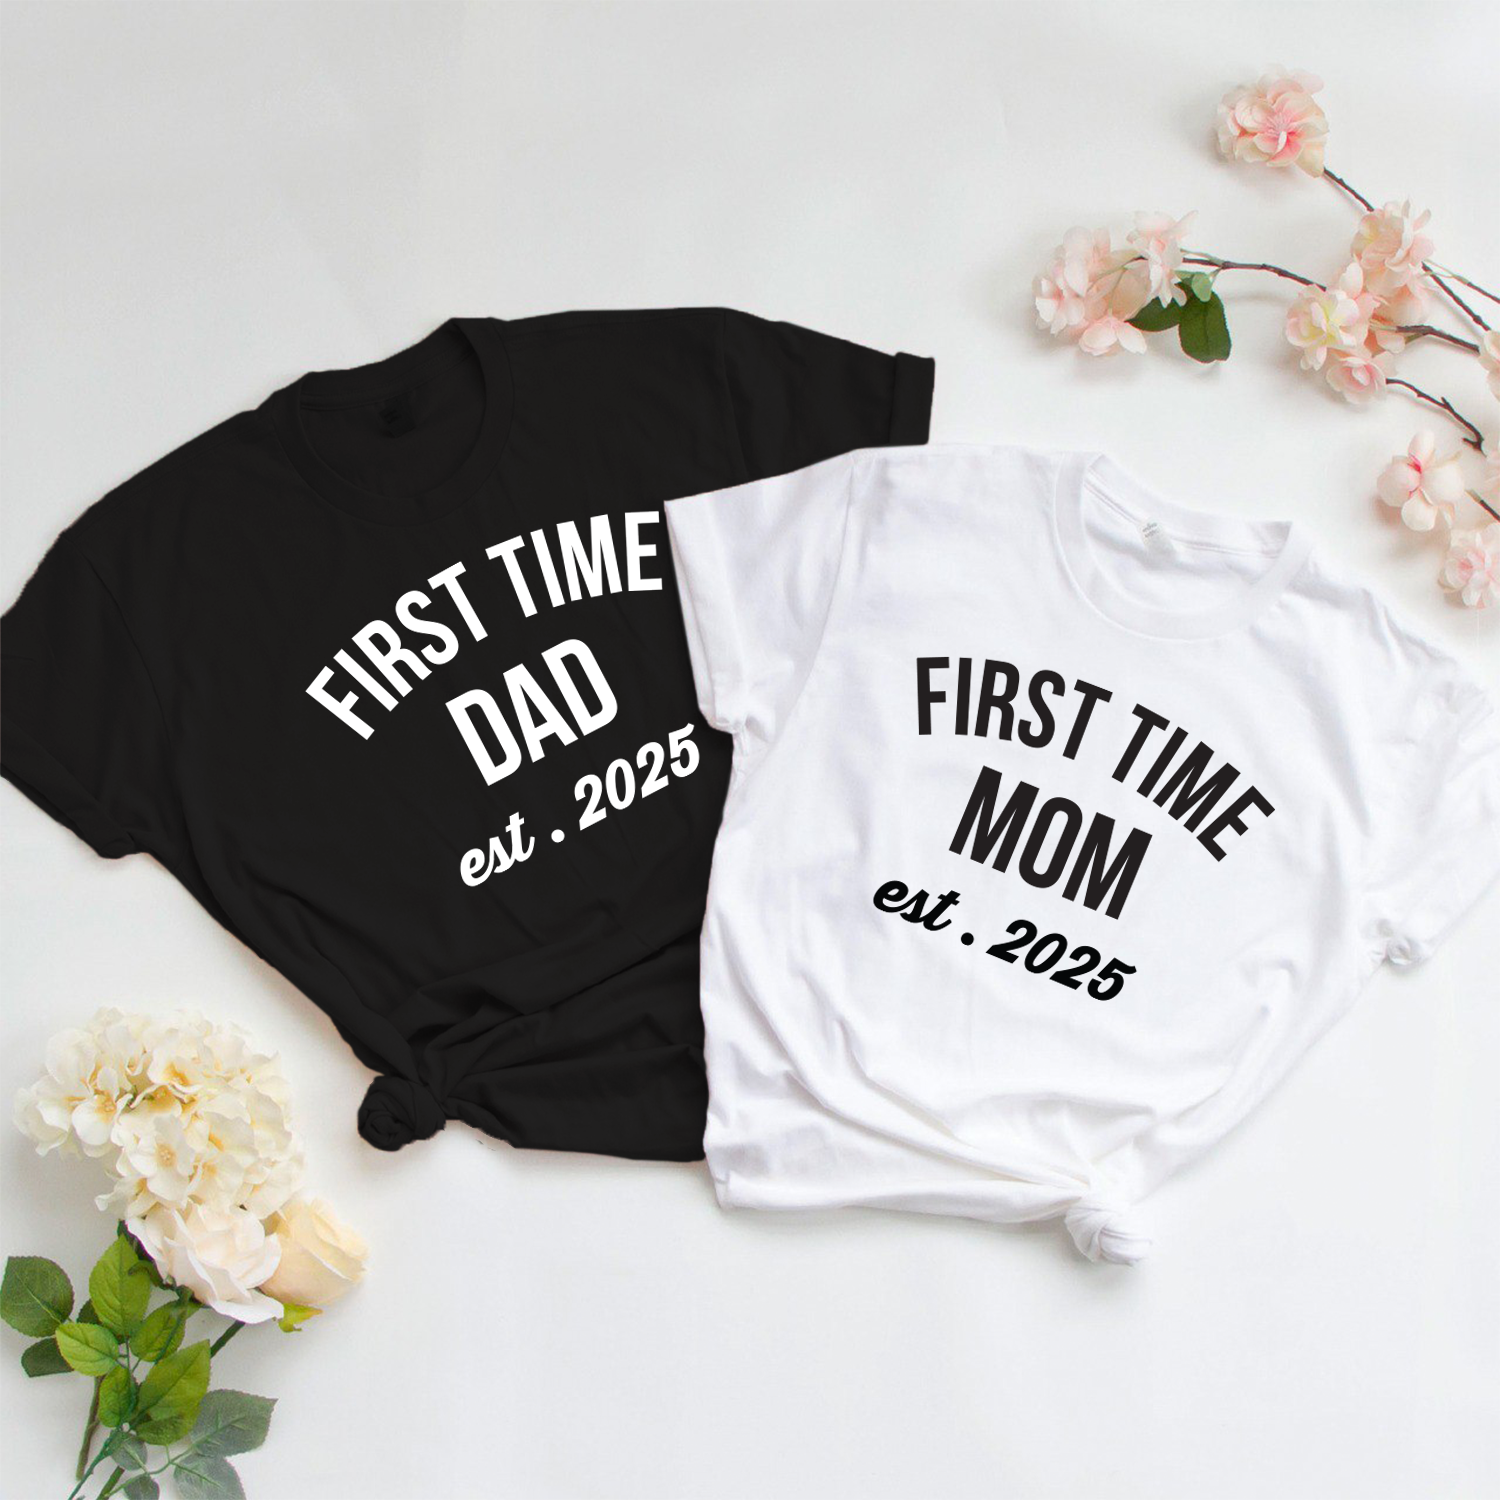 New Parents - First Time Dad & First Time Mom